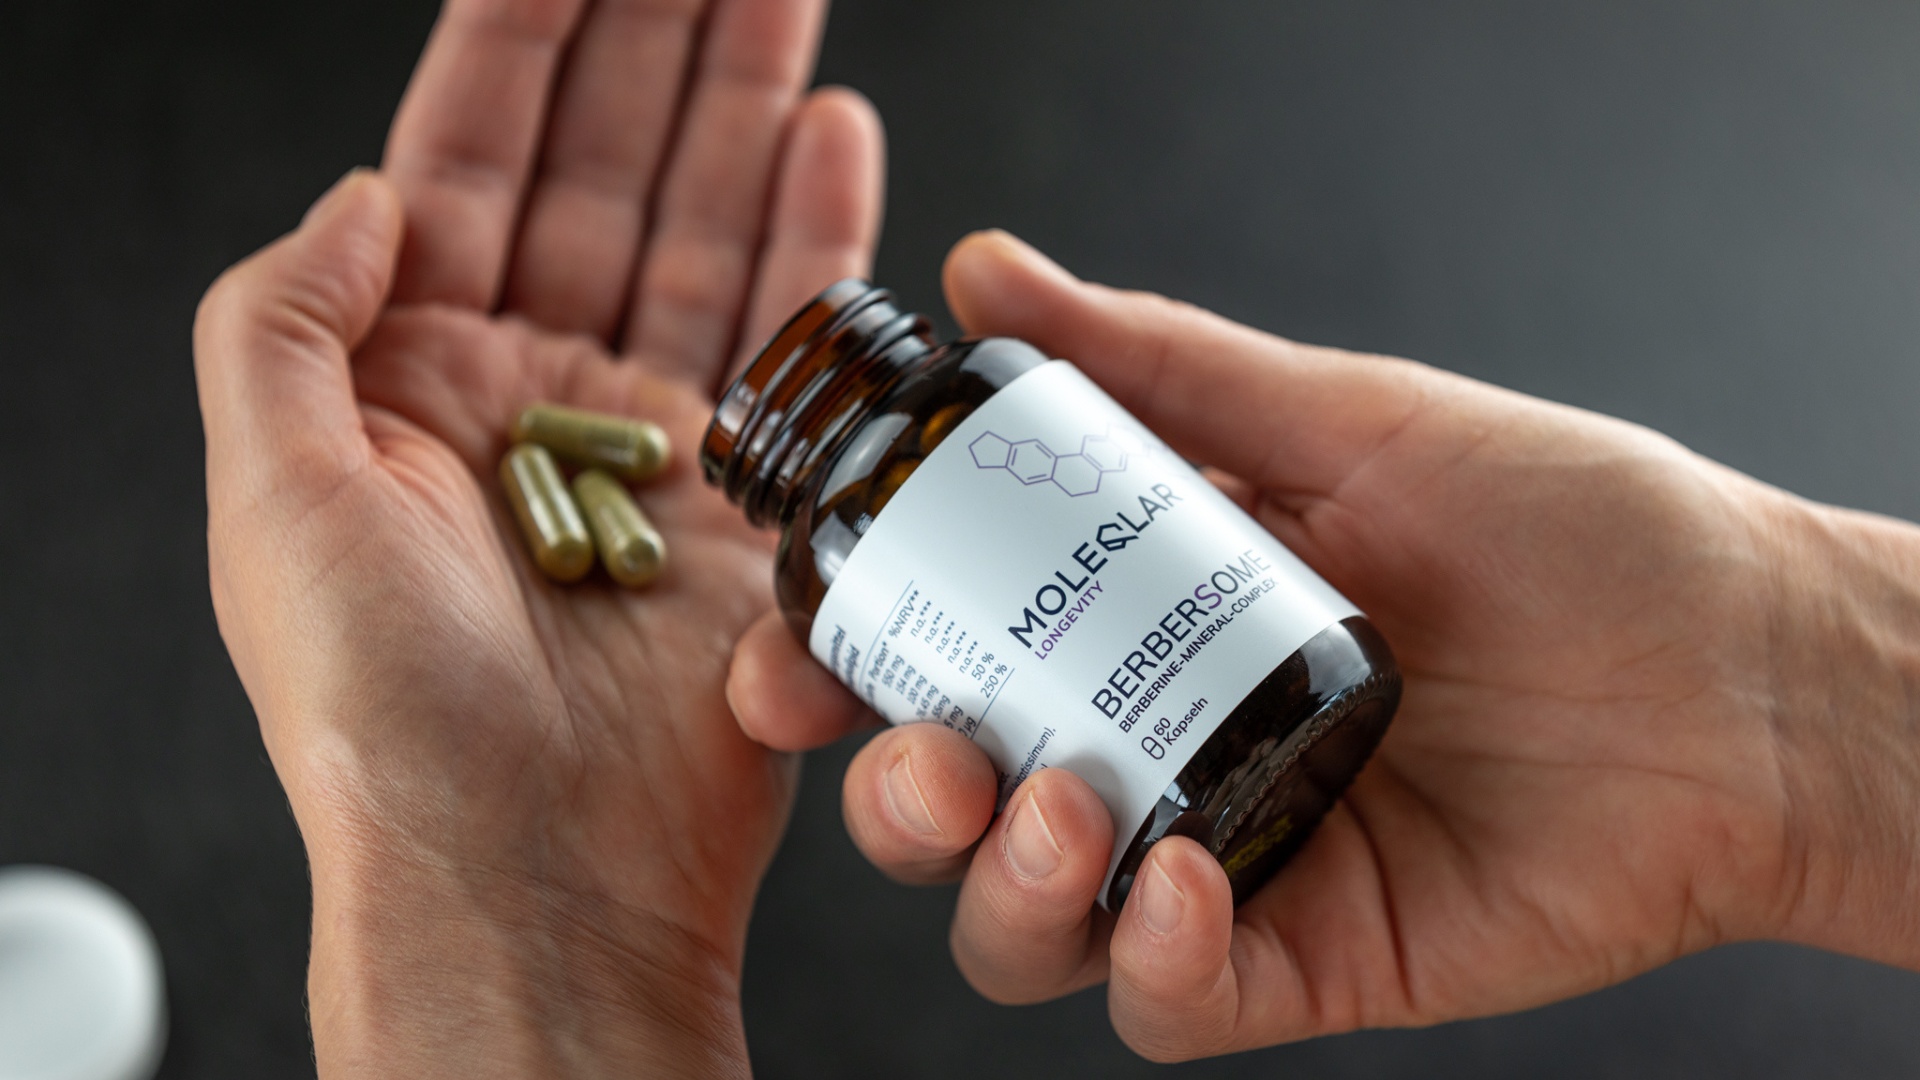 Berbersome capsules in one hand.